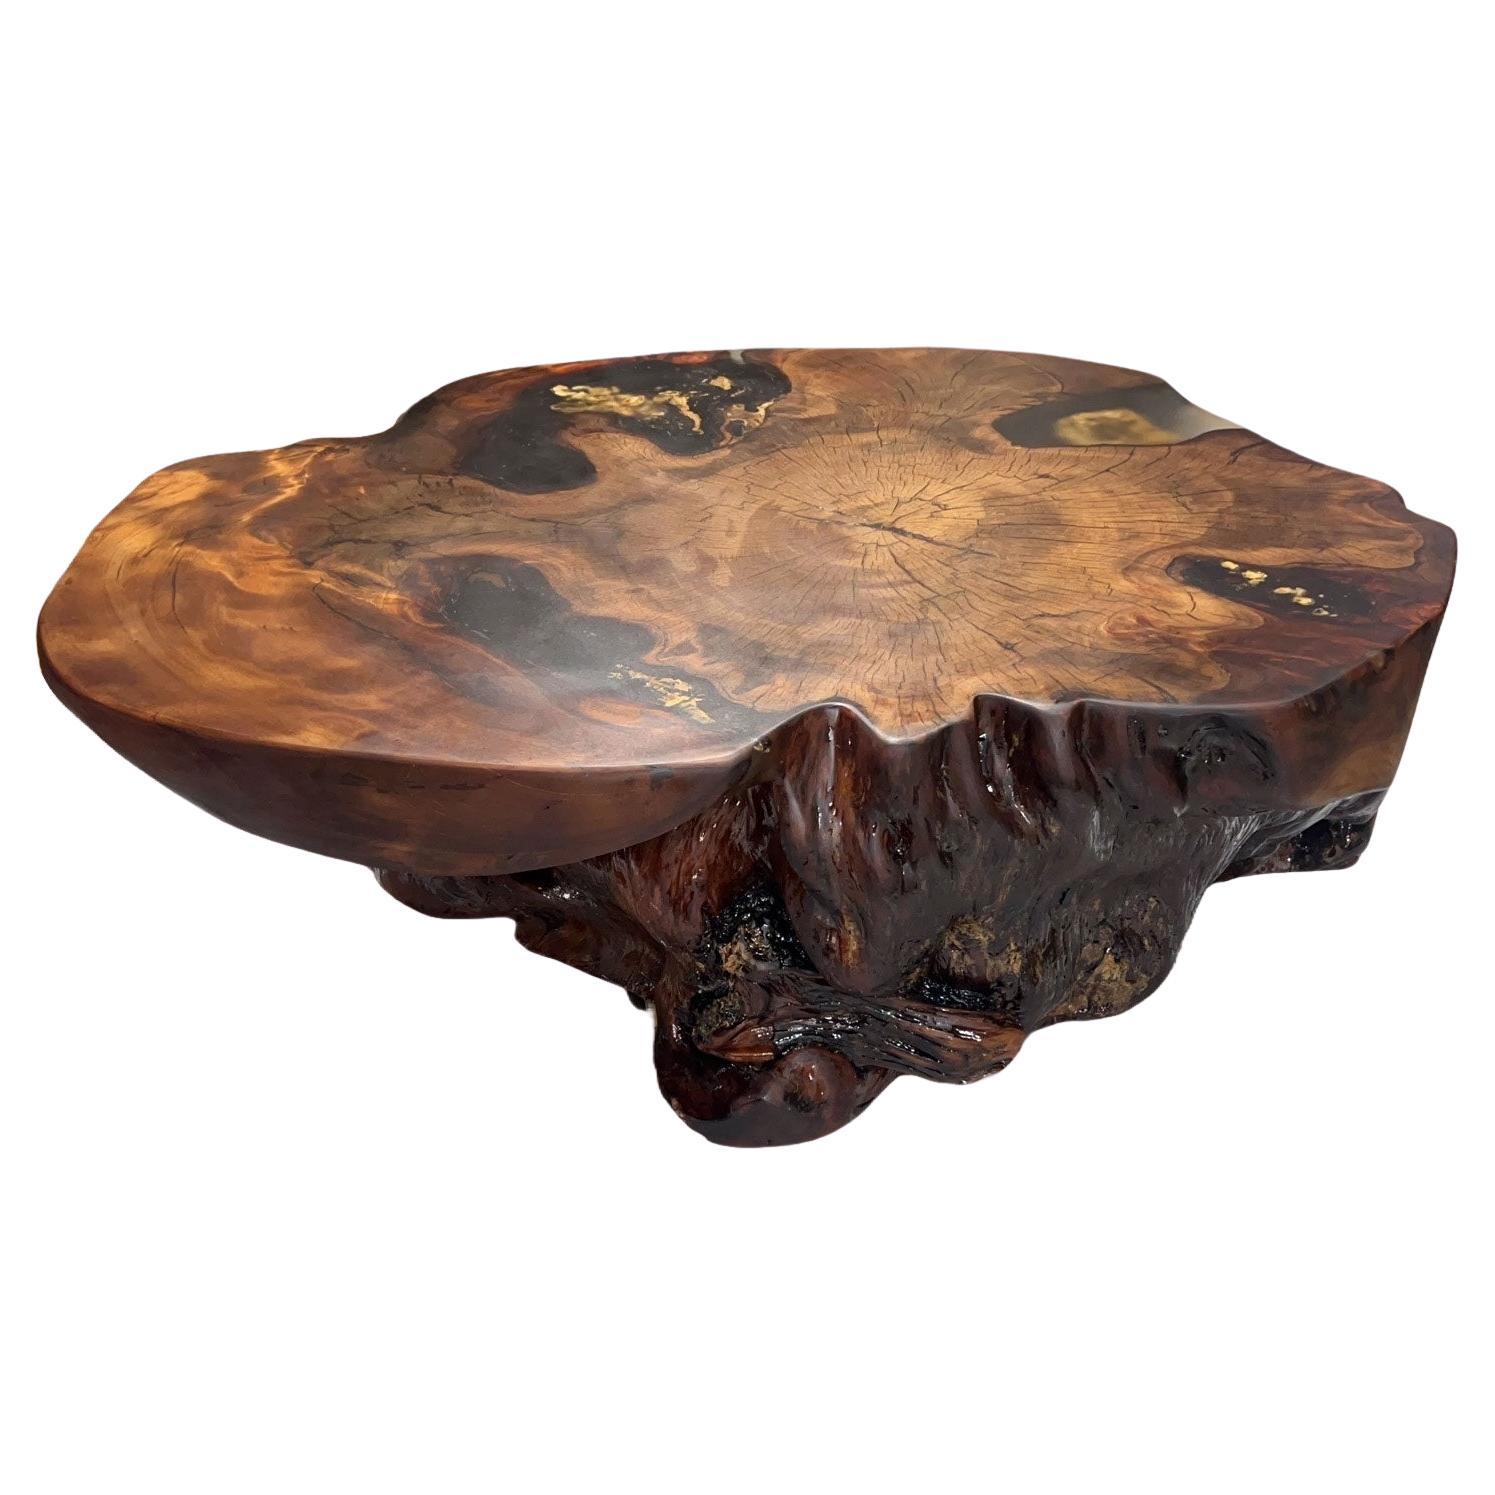 For the limited edition, THE TITANS is a series of collectable Ancient Kauri stump tables. Every TITAN comes with a certificate of authenticity.

Ancient Kauri or Swamp Kauri refers to prehistoric Kauri forests, buried and preserved in peat swamp up